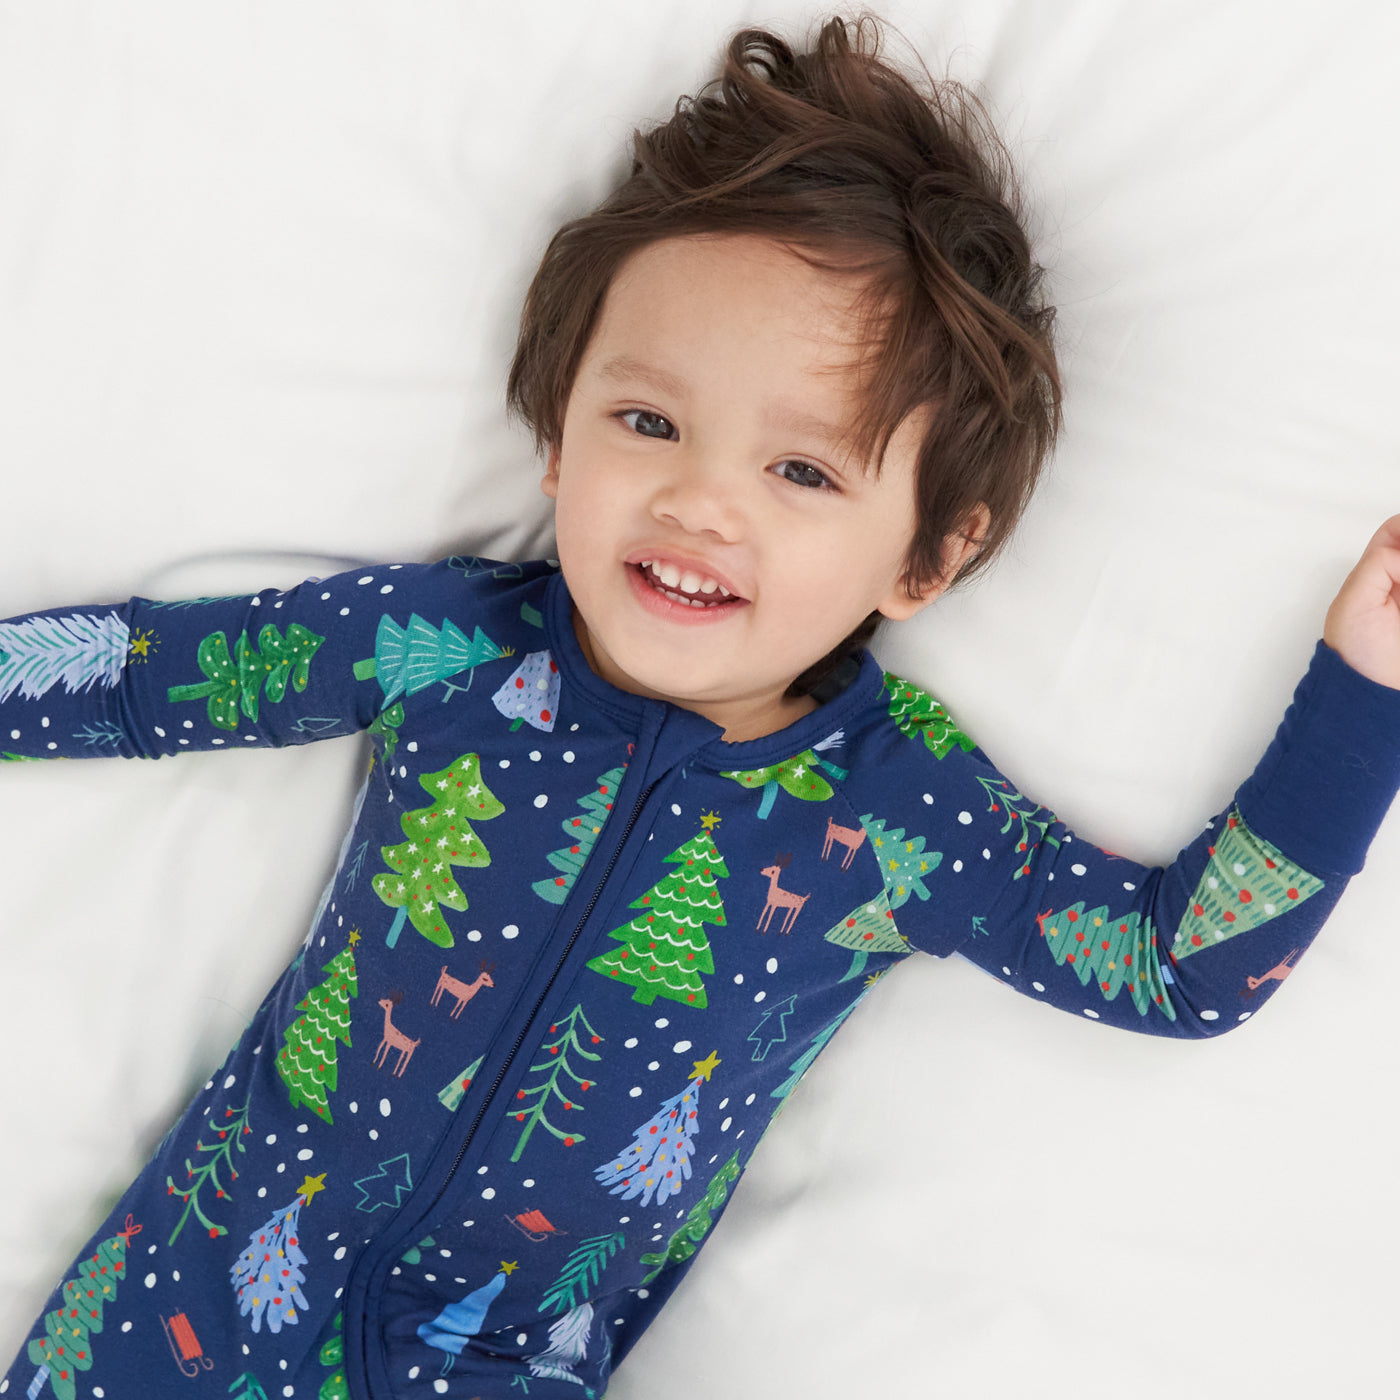 Child laying on a bed wearing a Blue Merry and Bright zippy